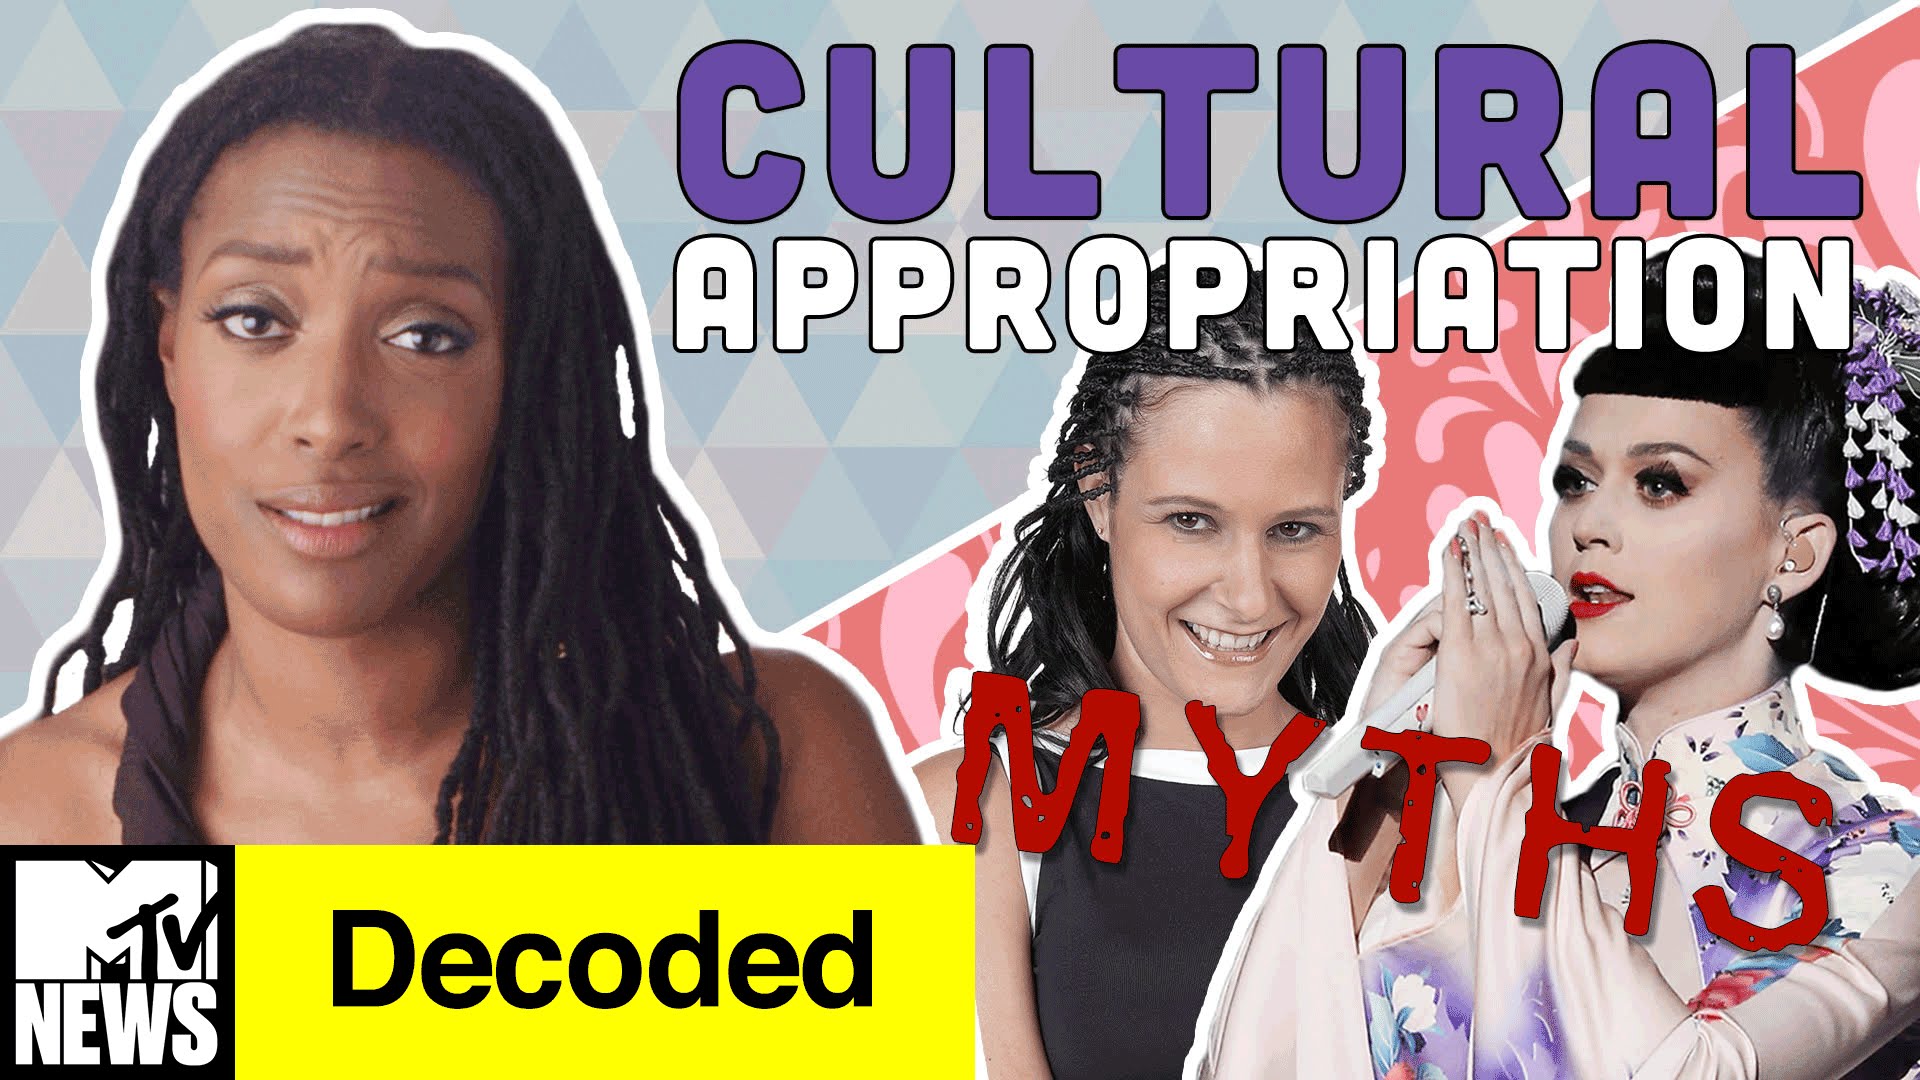 The 7 Most Commonly Believed Myths About Cultural Appropriation Busted Everyday Feminism 